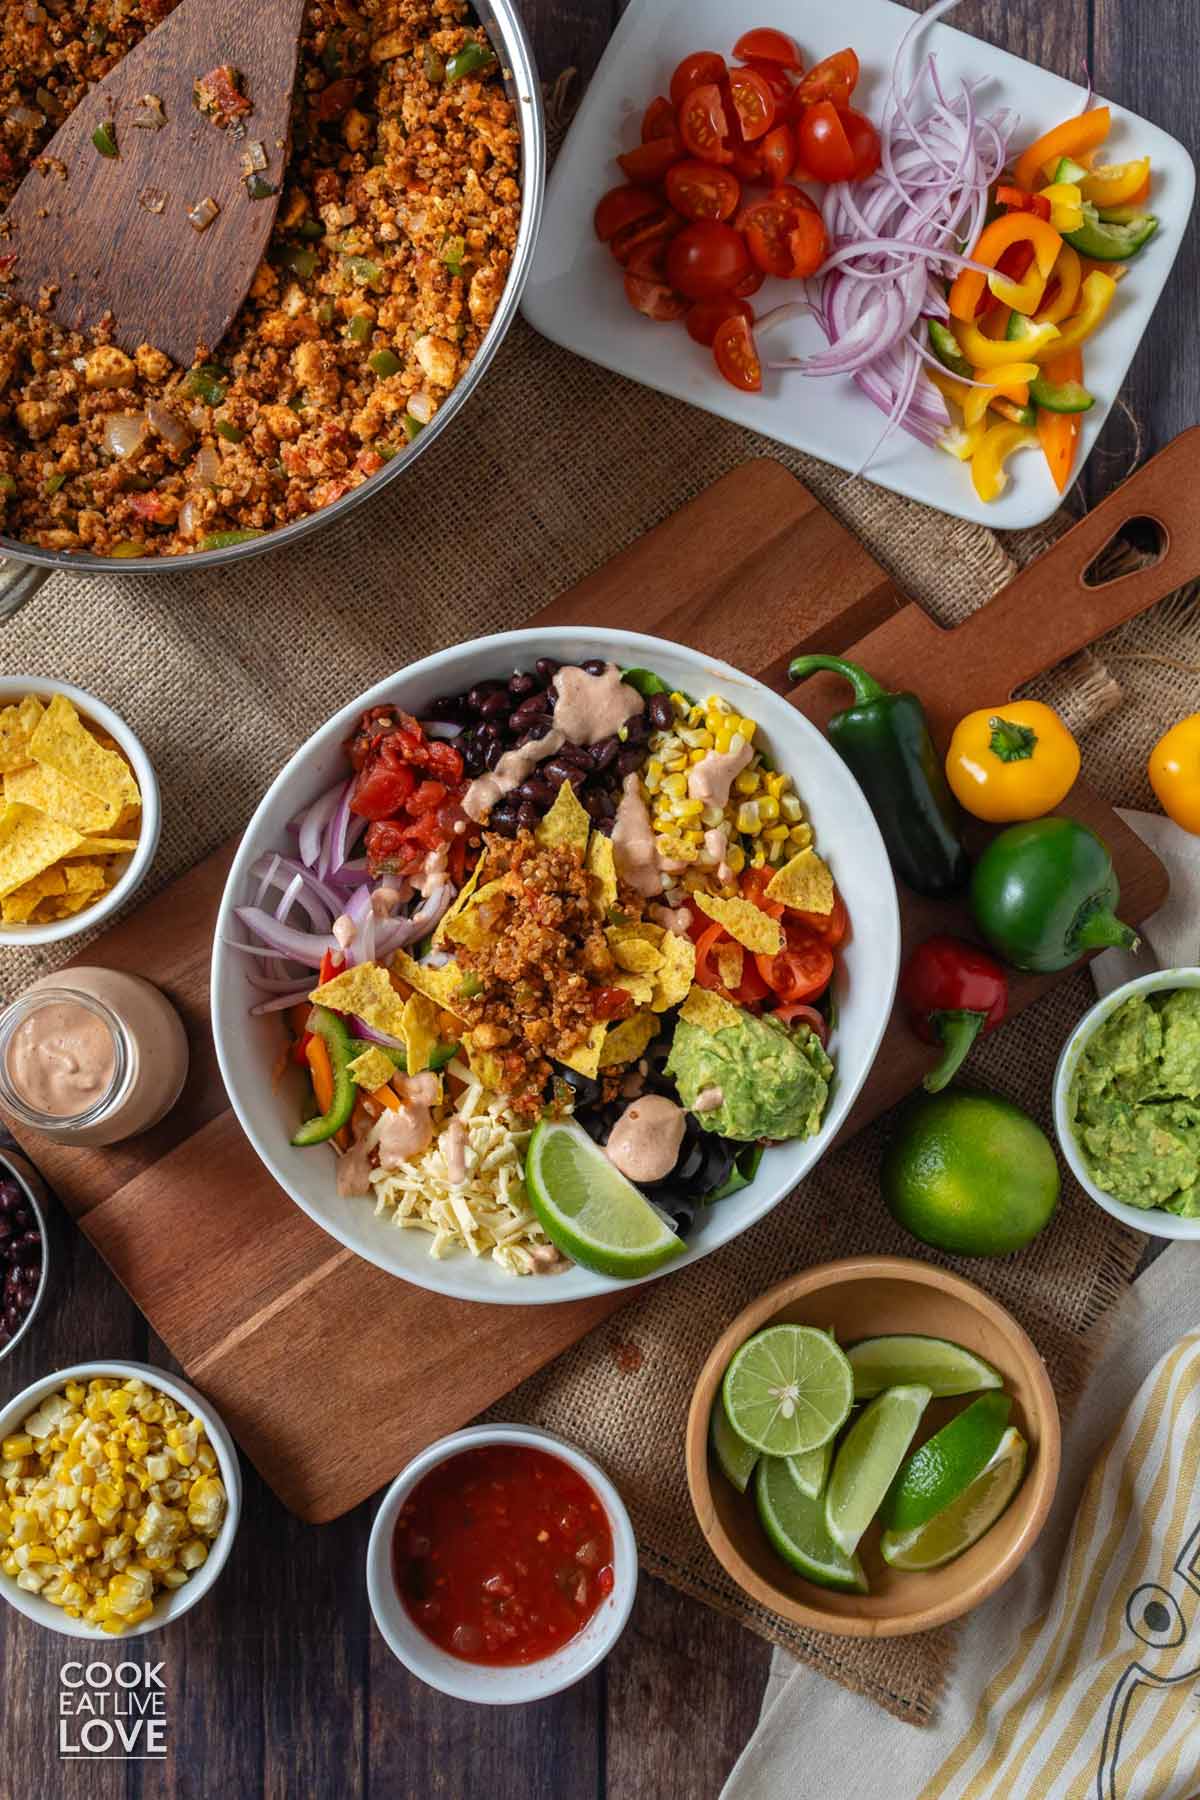 A vegan taco salad on the table surrounded by a plate with the toppings, bowls of avocado, chips, and a skillet of the tofu taco meat.